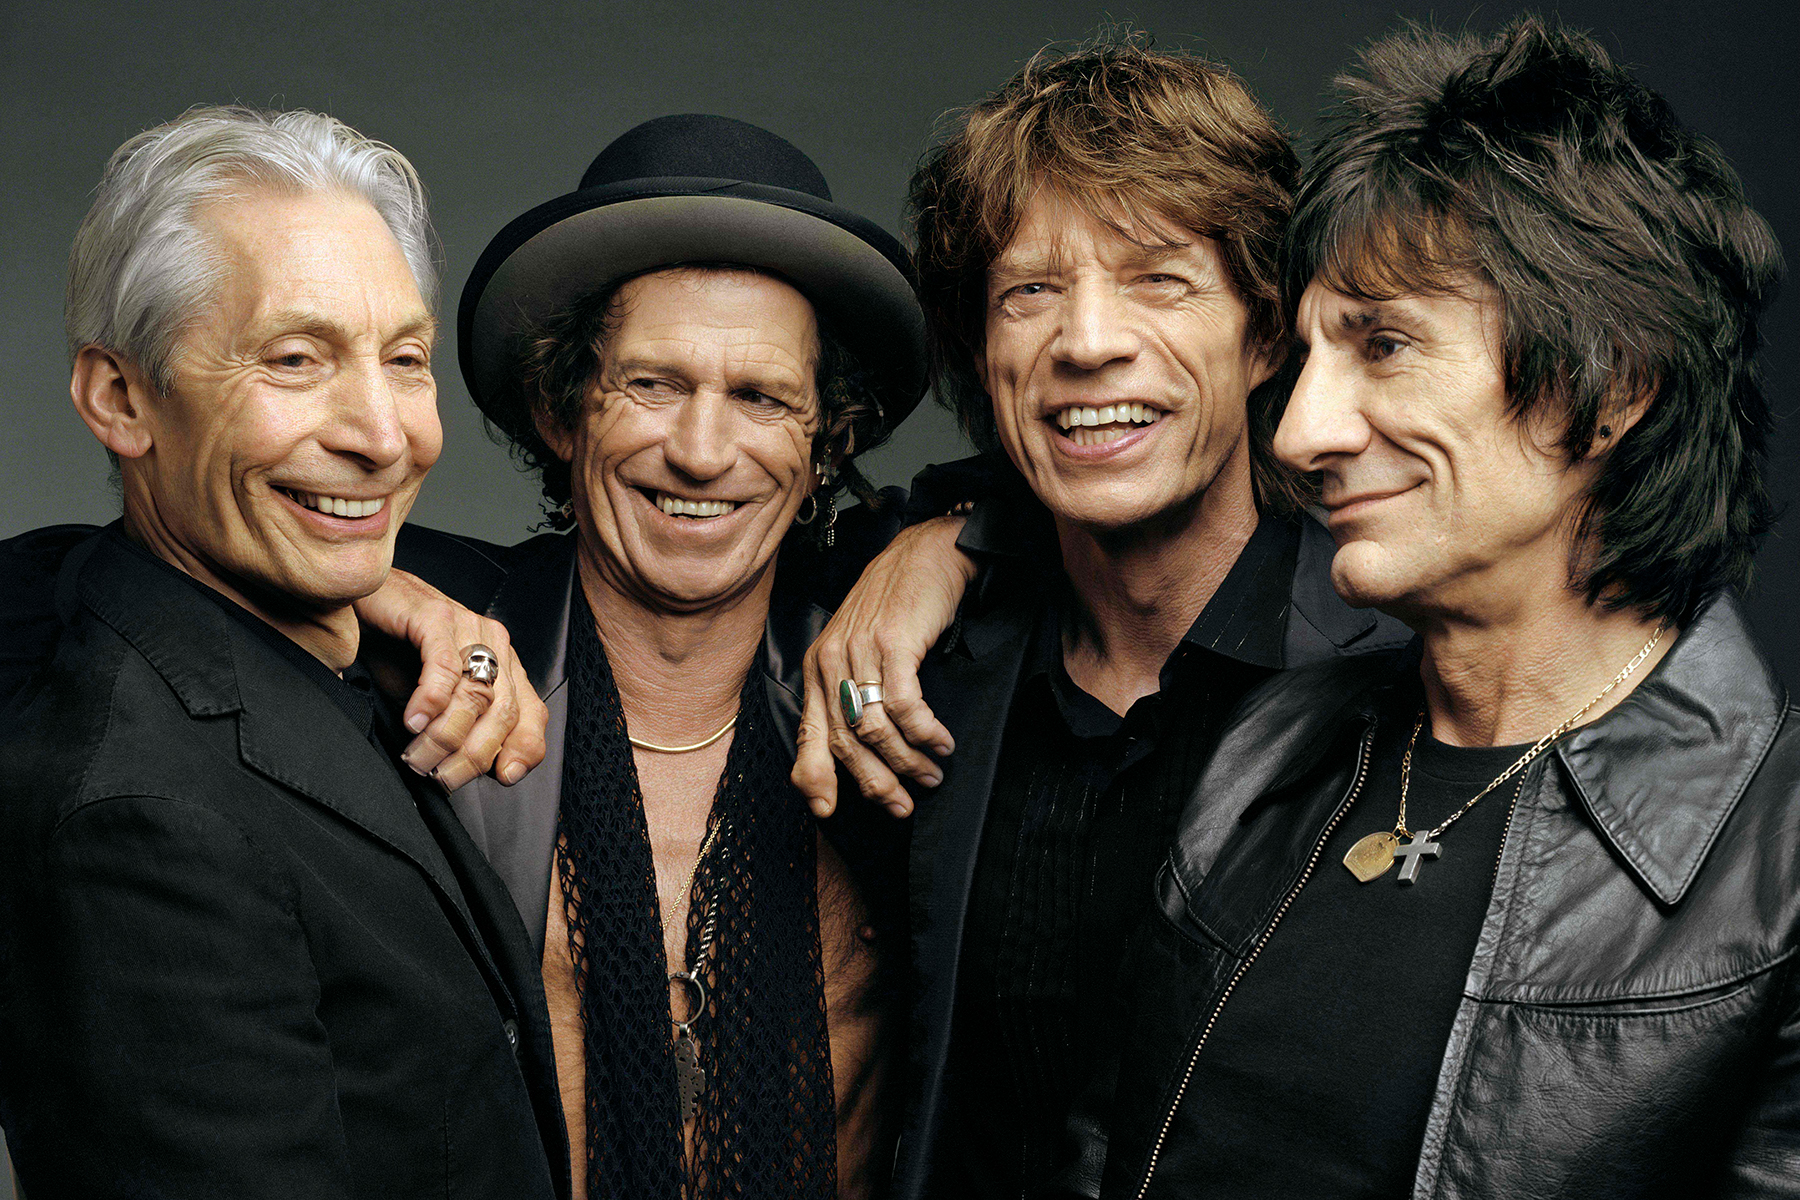 “My Life as A Rolling Stone” Trailer: Check out the Band’s New Docuseries